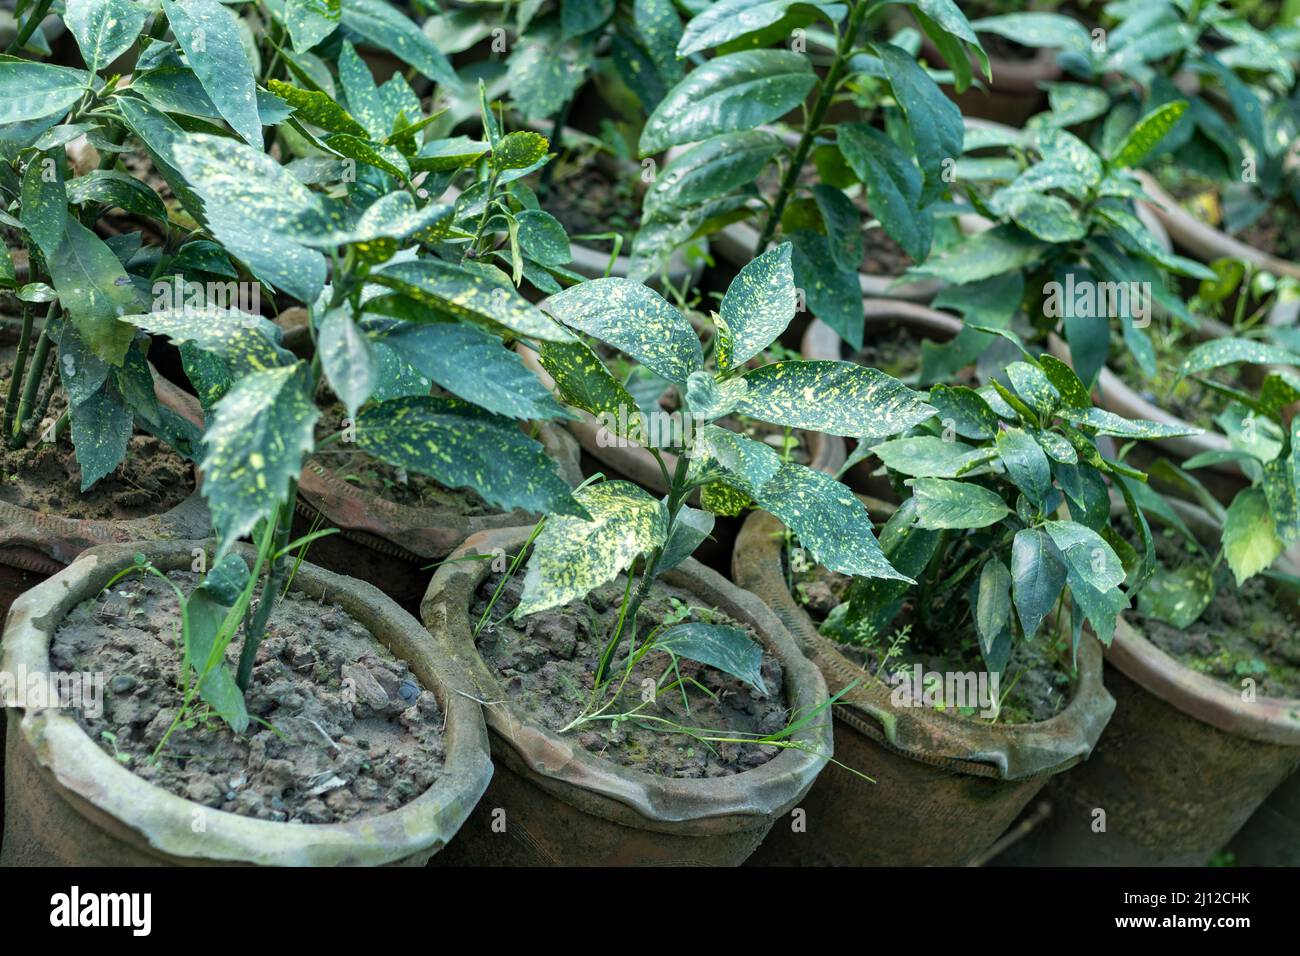 Green croton plants growing in pots Stock Photo